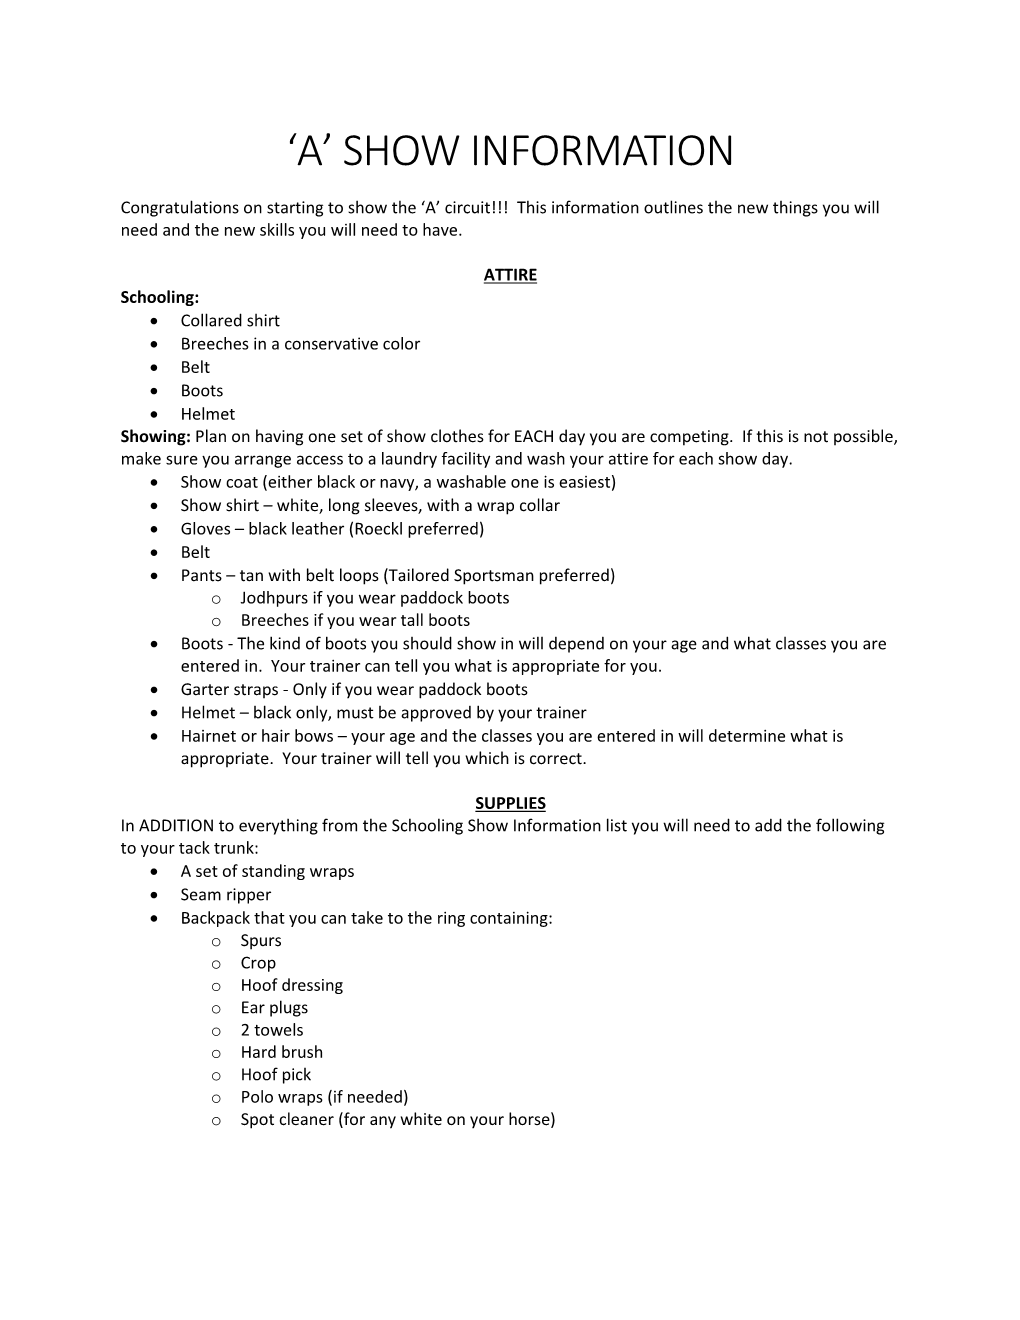 'A' Show Information